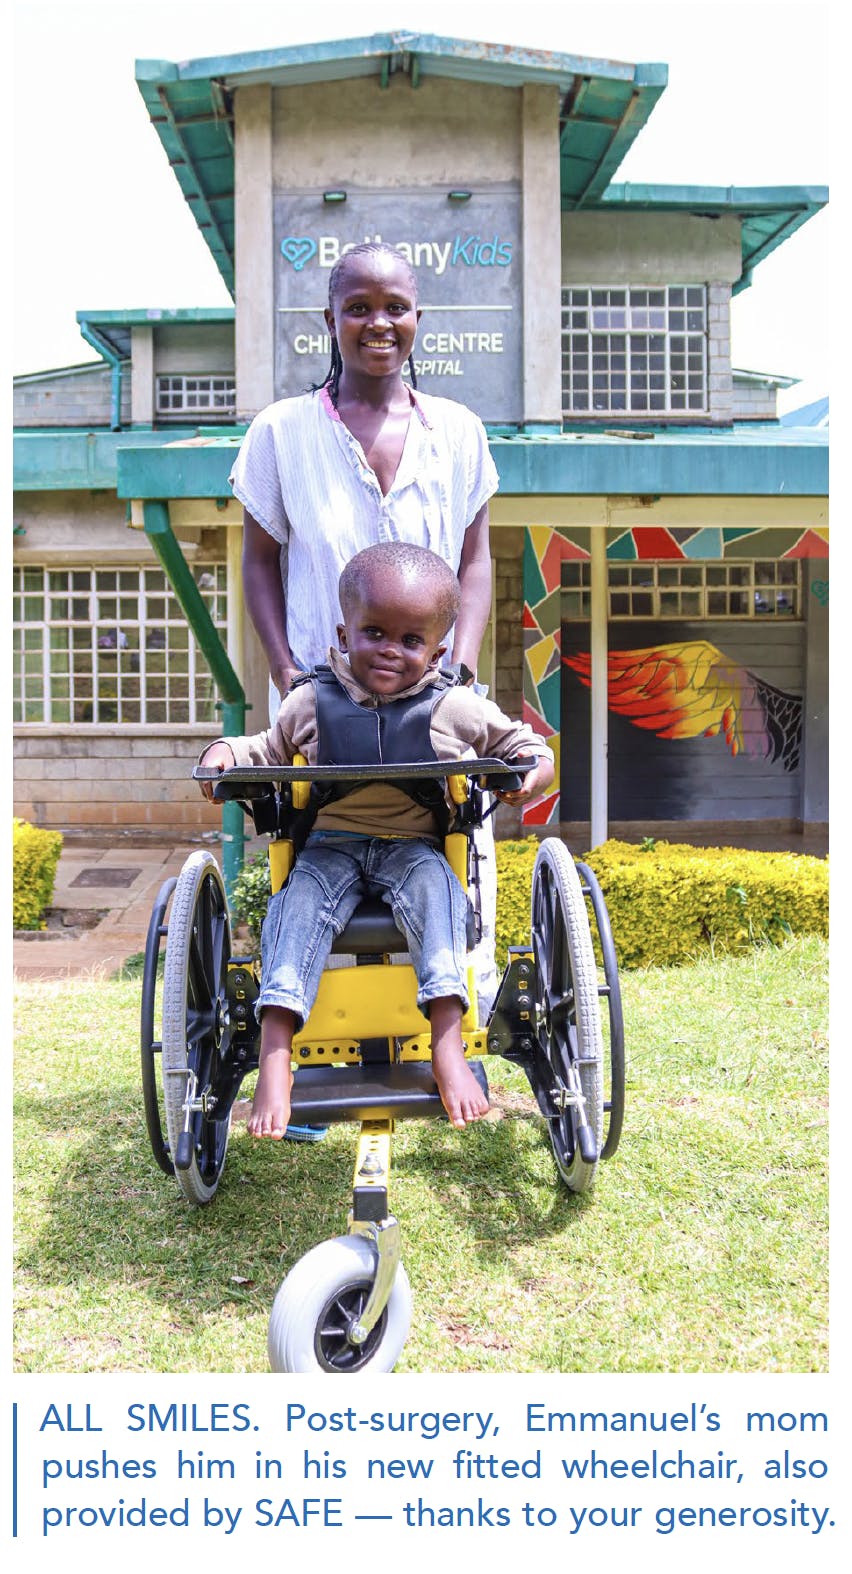 A woman is pushing a wheelchair. A child is in the wheelchair. Both are smiling. The caption reads: ALL SMILES. Post-surgery, Emmanuel's mom pushes him in his new fitted wheelchair, also provided by SAFE -- thanks to your generosity.